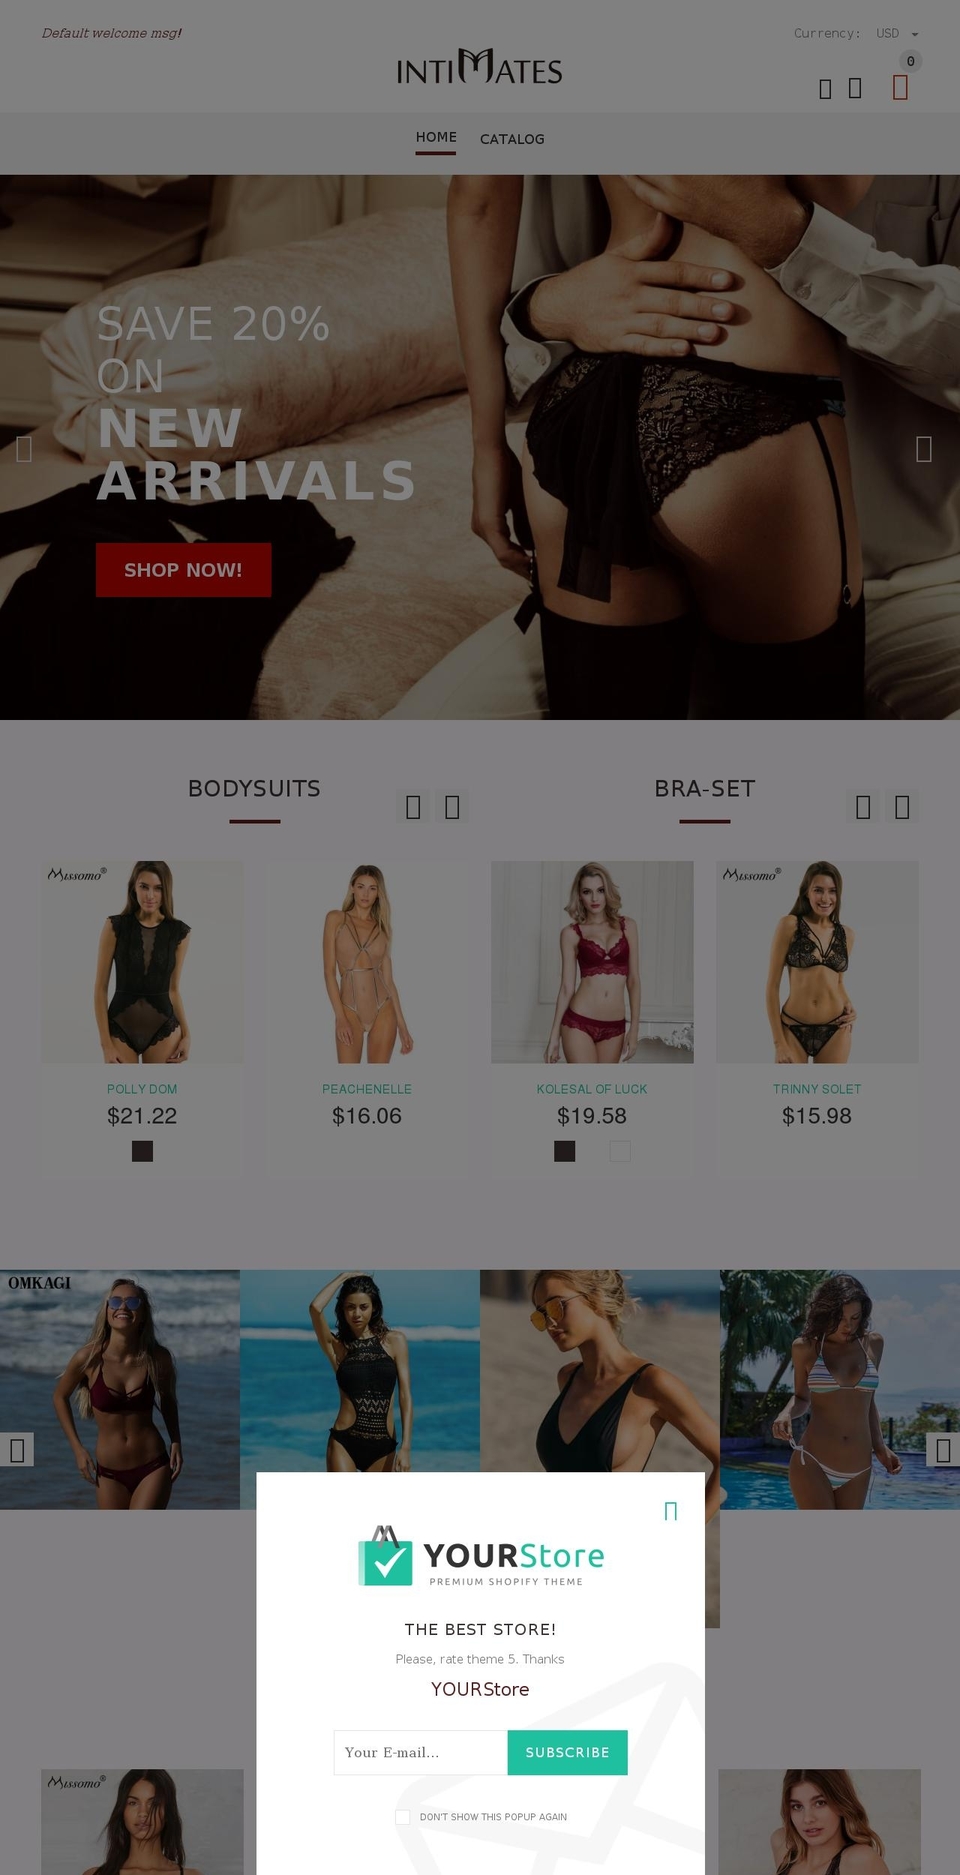 install-me-yourstore-v2-1-9 Shopify theme site example intimmates.com